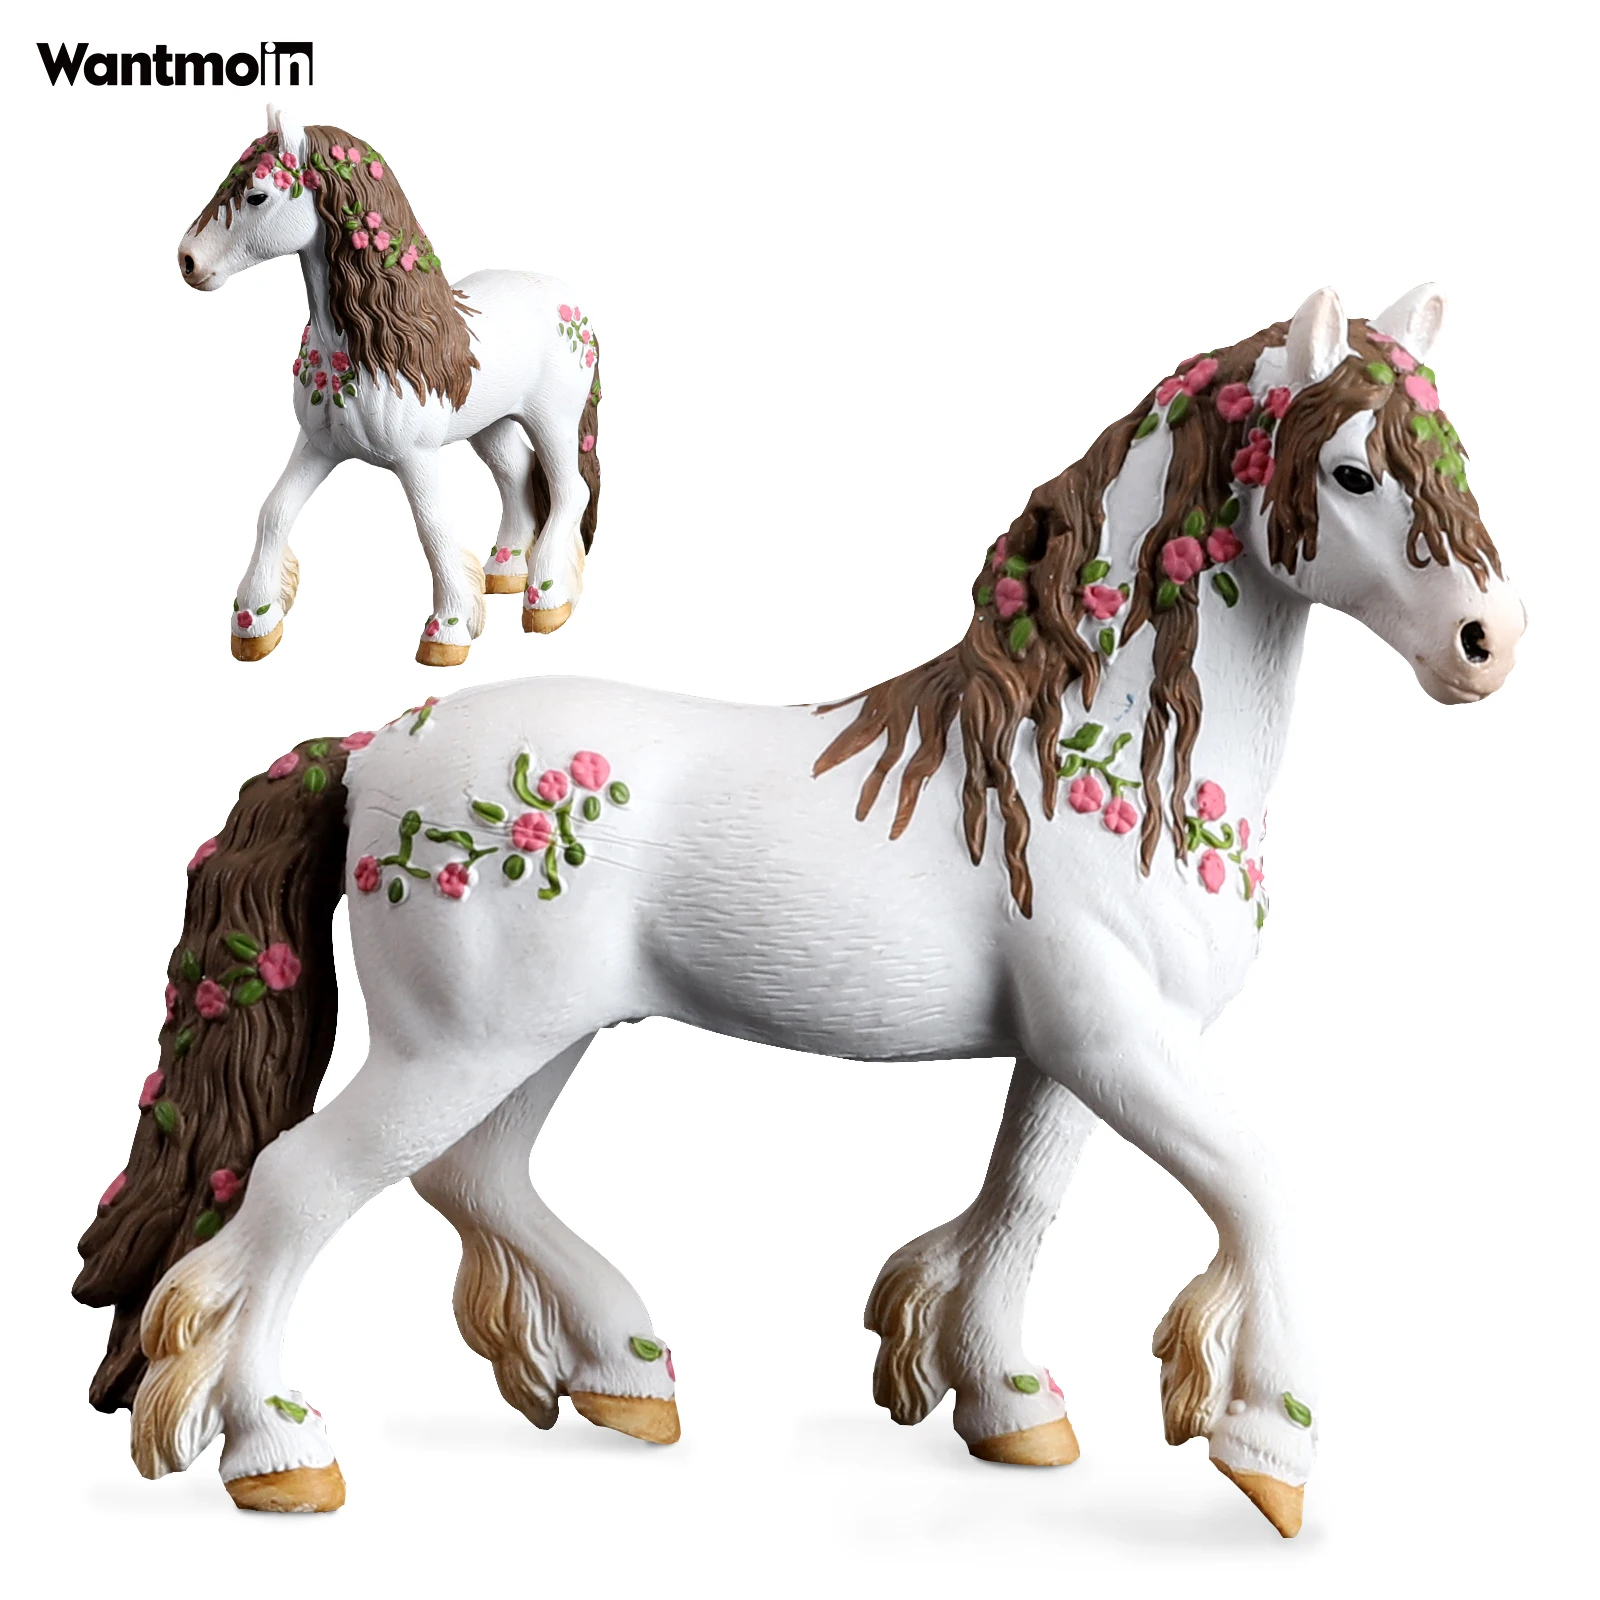 

Wantmoin Imports Set of Animal Horse Figurines for Kids - Realistic Toy Pony Figures Bulk Animal Variety Cake Toppers Gift Pack